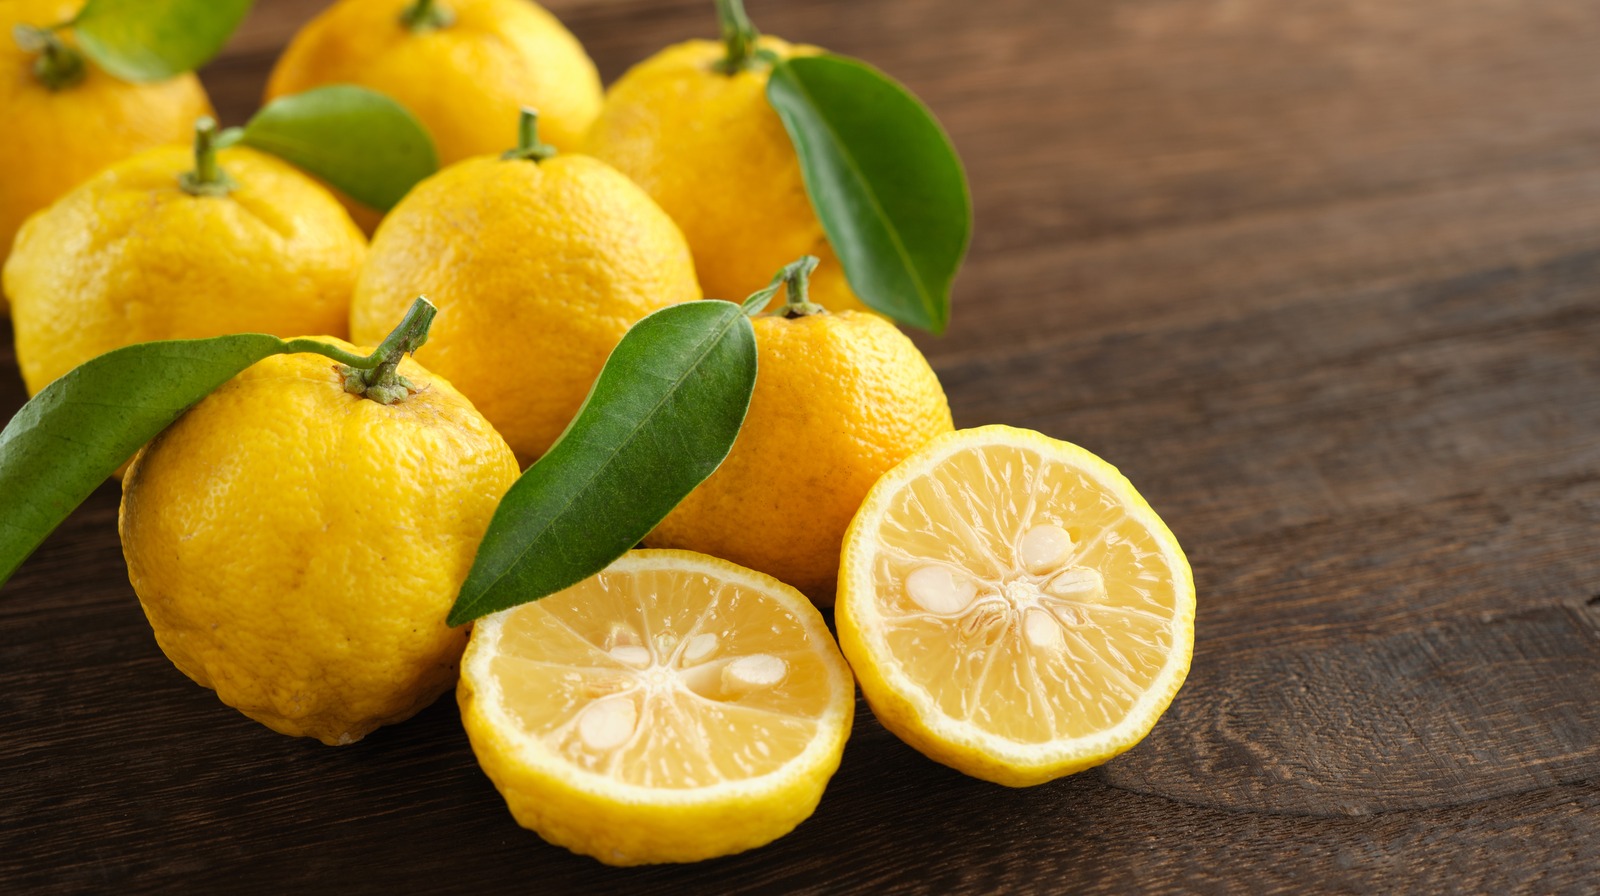 Yuzu tree, grow the citrus that can survive cold winters